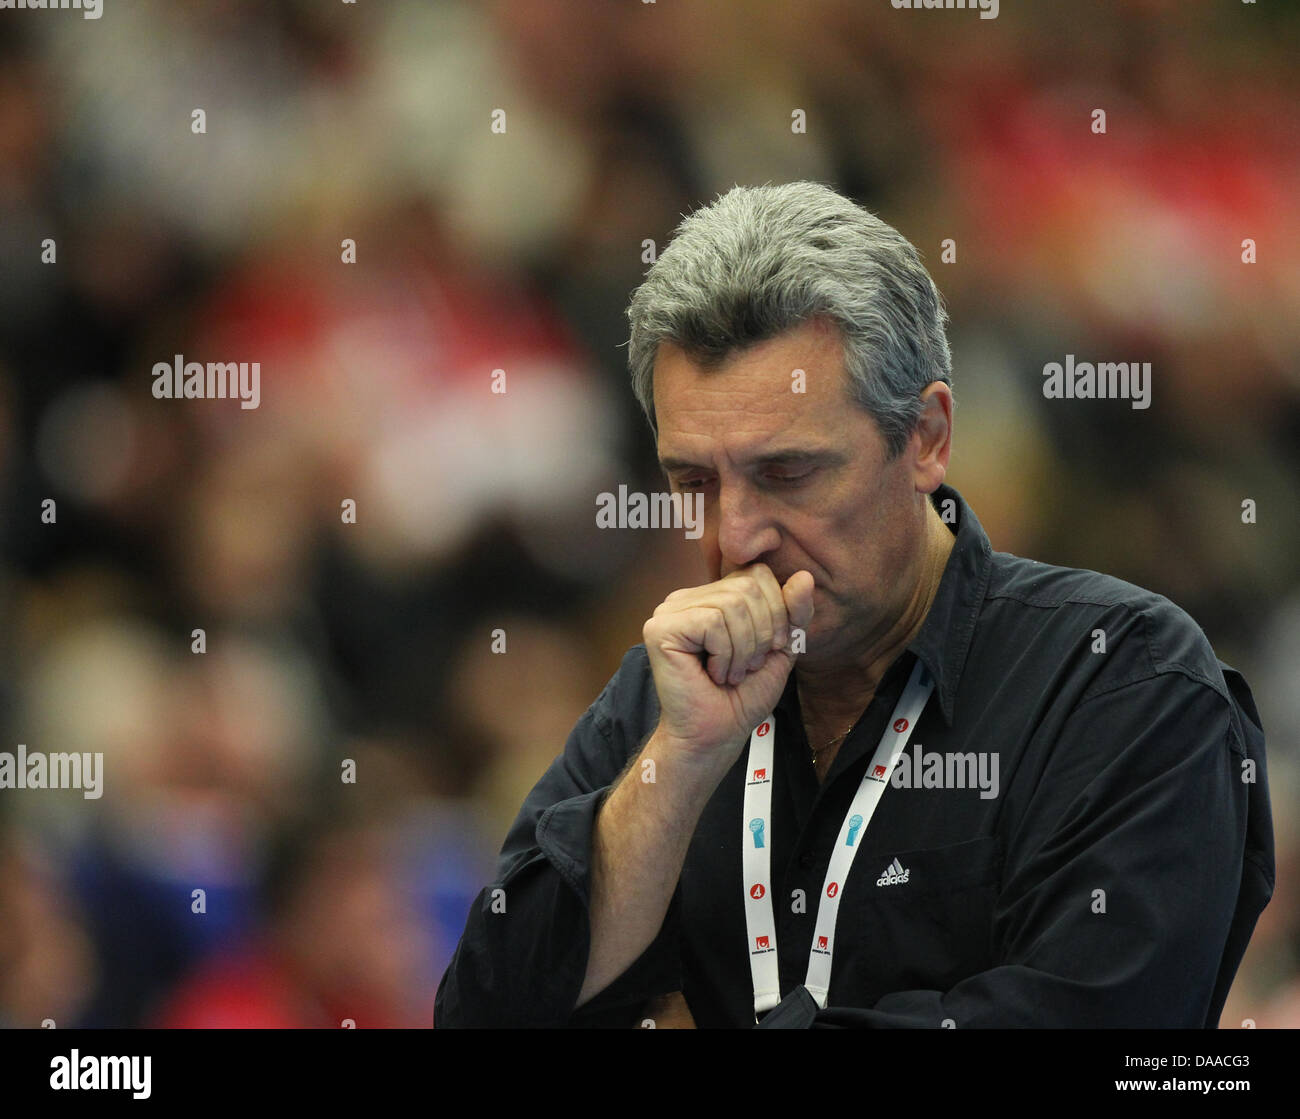 French headcoach Claude Onesta gestures  during the Men's Handball World Championship main round group 1 match Norway against France in Joenkoeping, Sweden, 24 January 2011. Photo: Jens Wolf Stock Photo